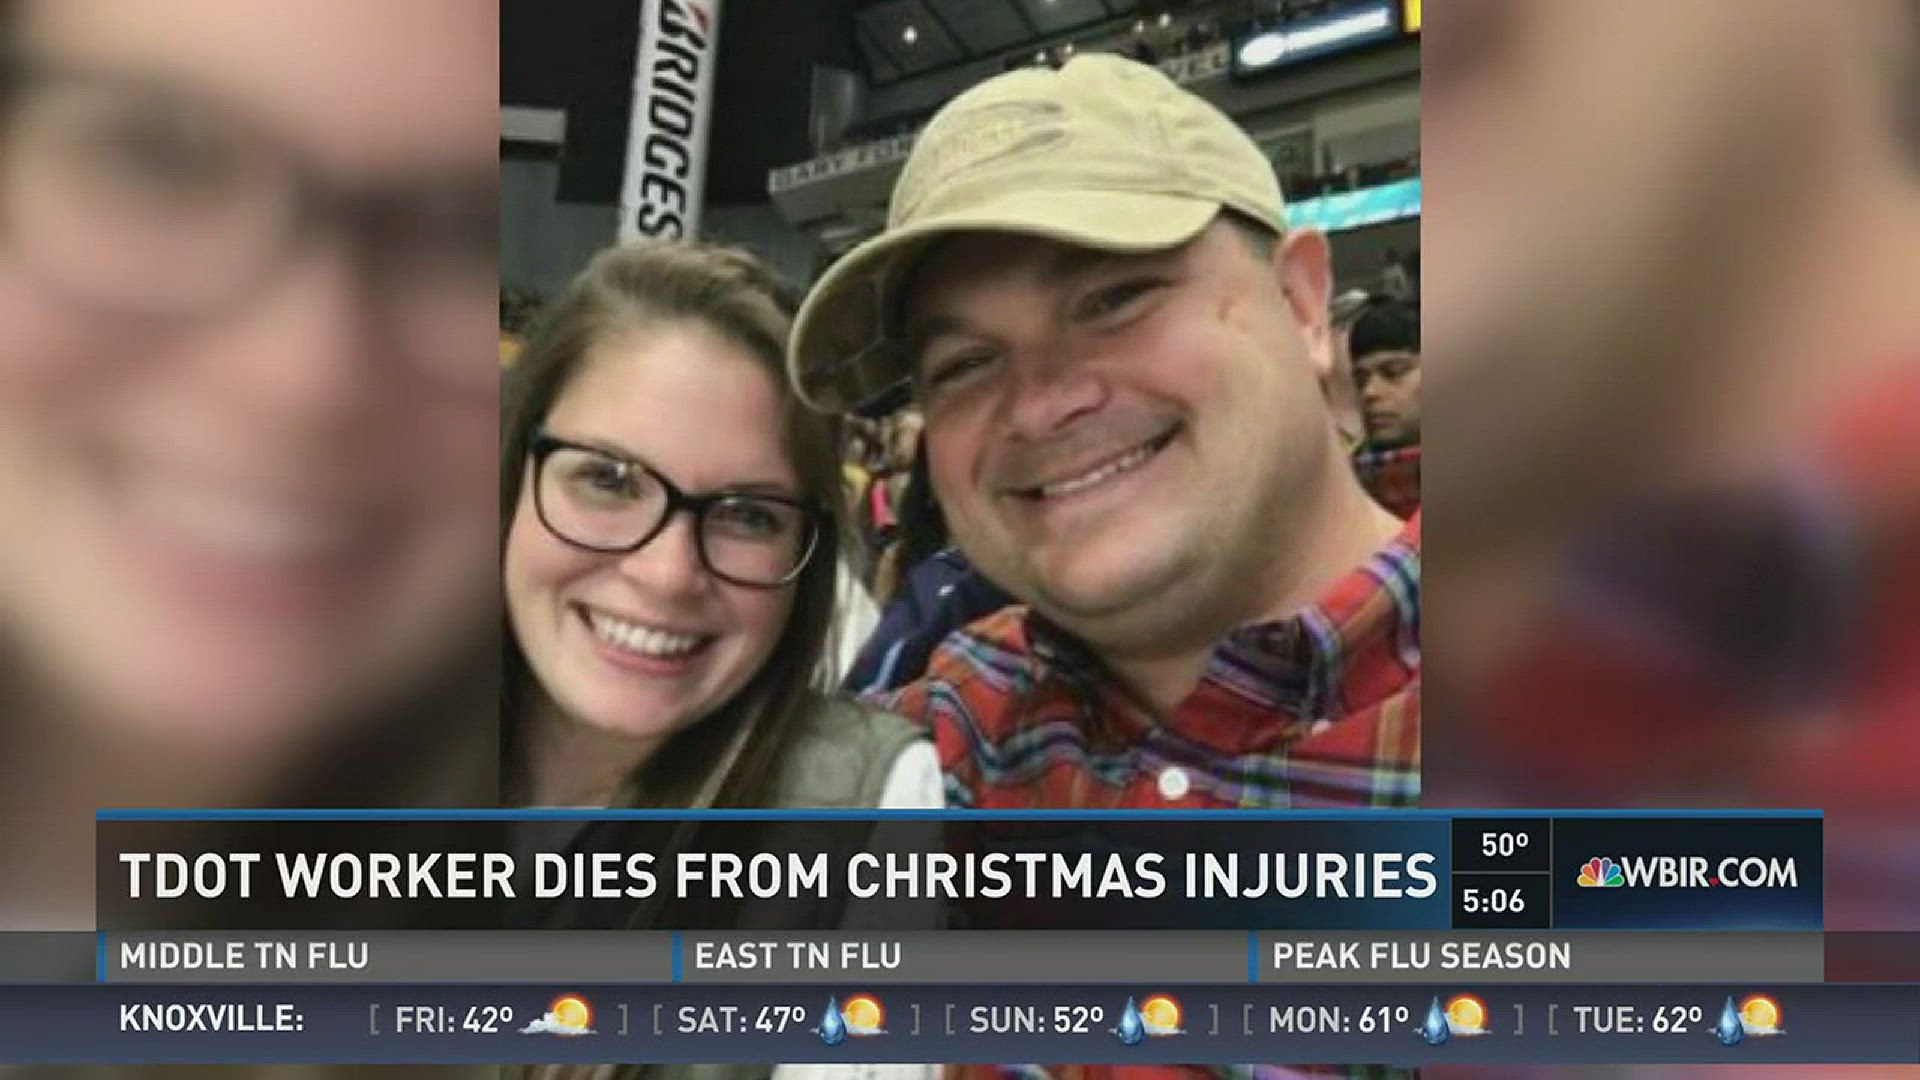 Dec. 29, 2016: A Middle Tennessee TDOT worker hit by a car on Christmas Eve has died.